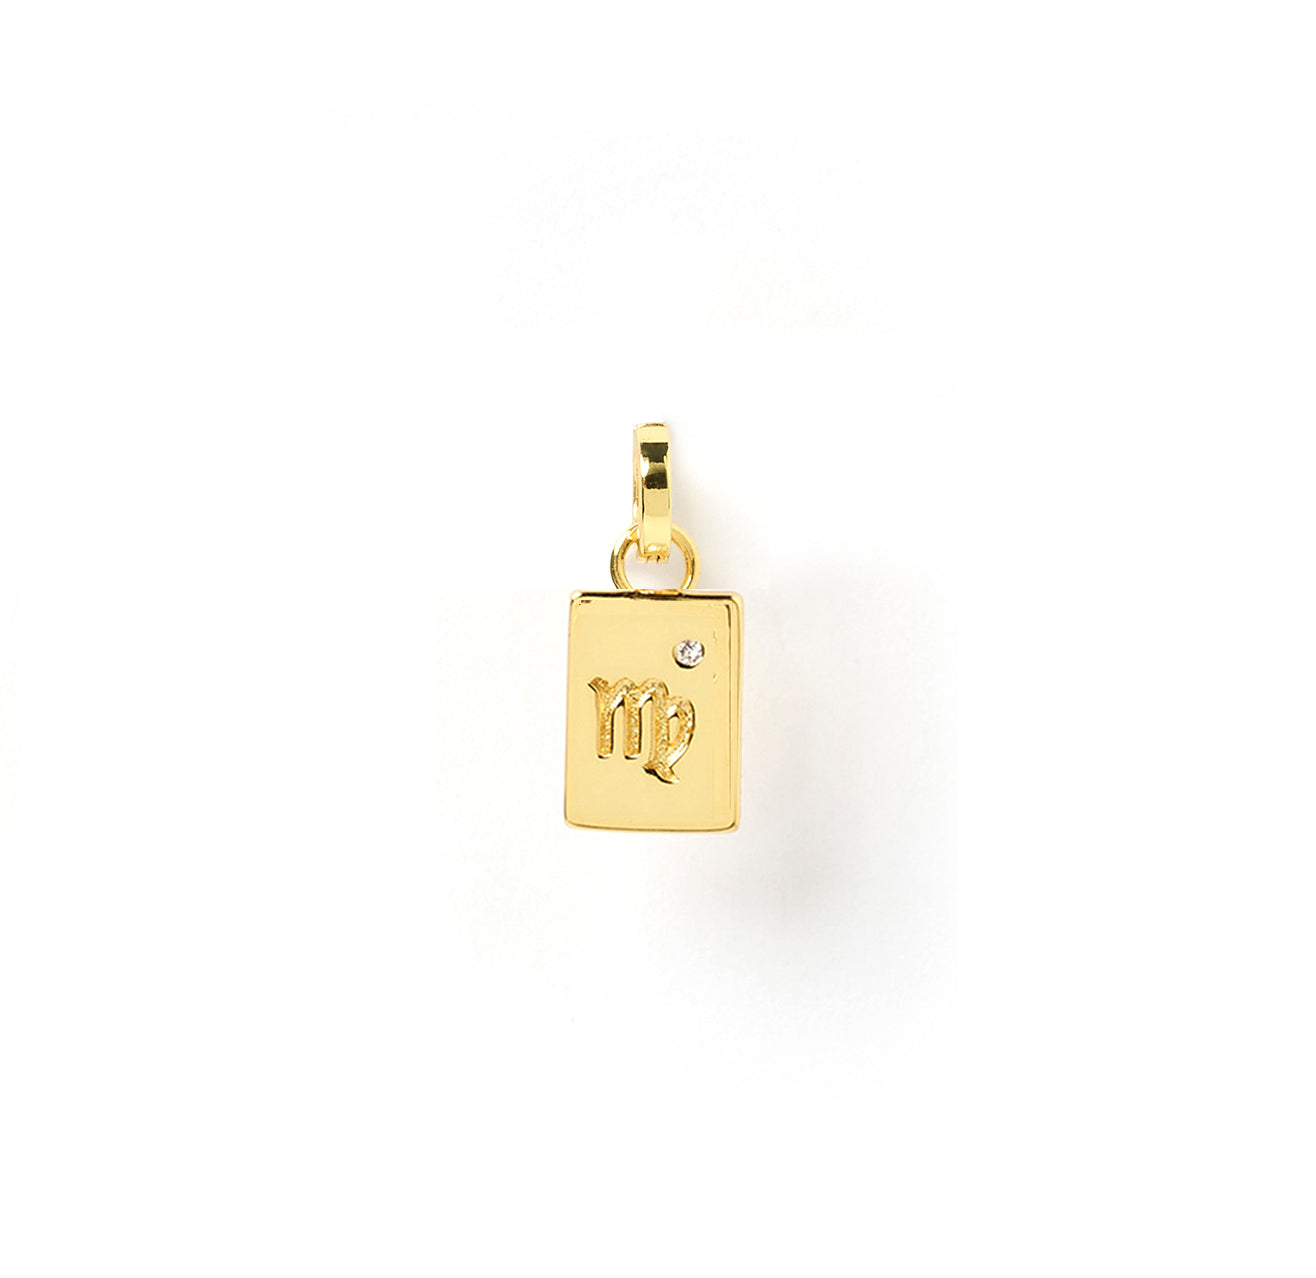 Arms Of Eve gold tag charm with the Scorpio zodiac sign and a diamond, a perfect combination for astrology enthusiasts